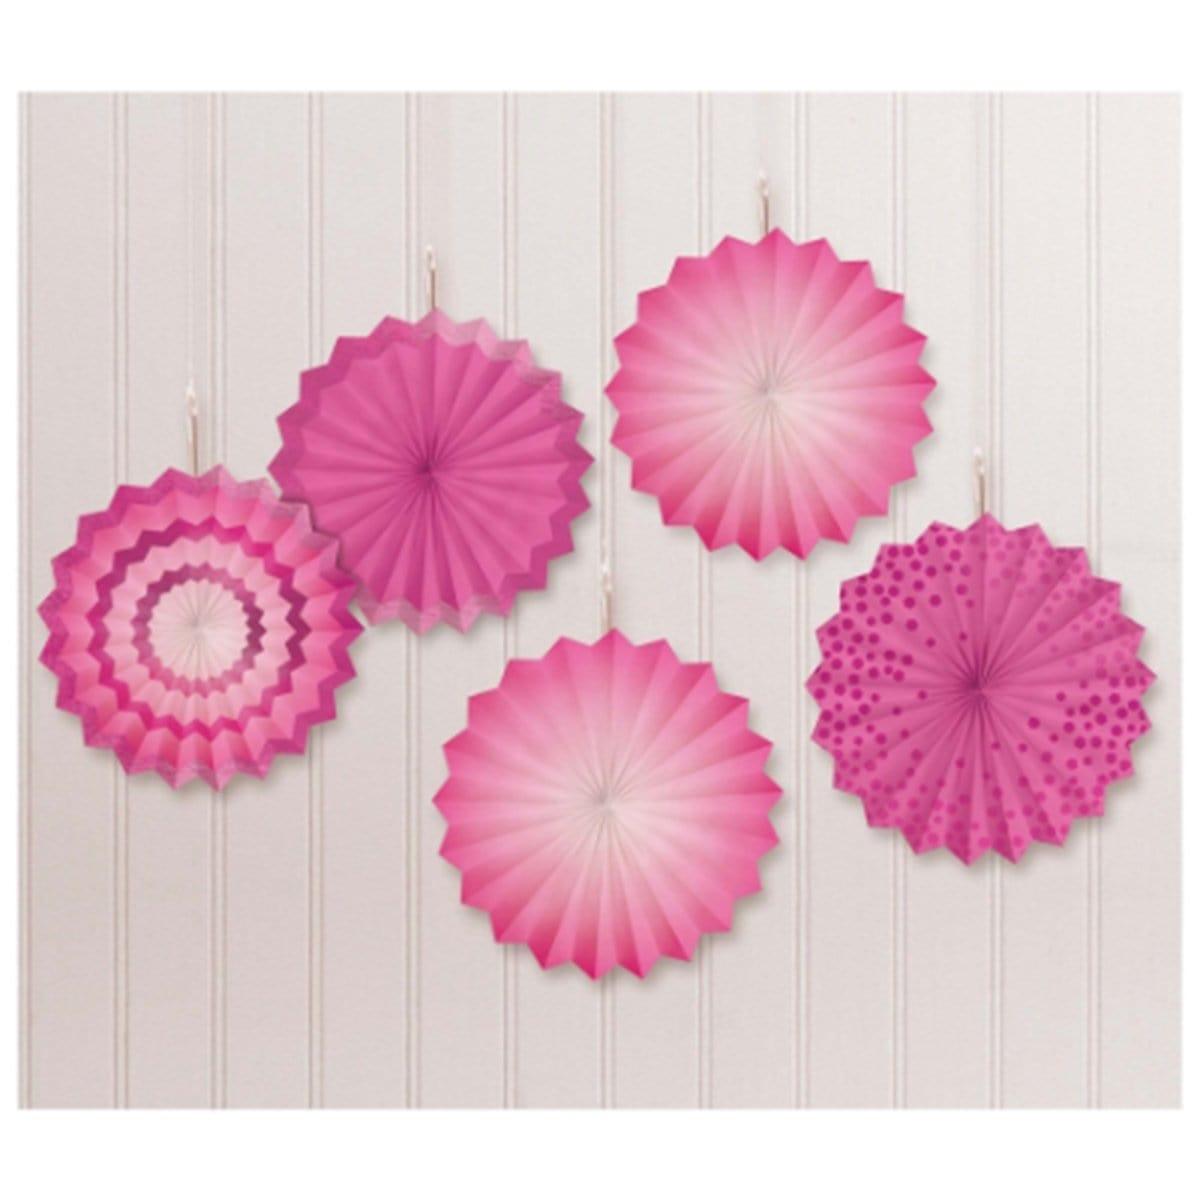 Buy Decorations Mini Fan Decoration 5 Per Package - Bright Pink sold at Party Expert